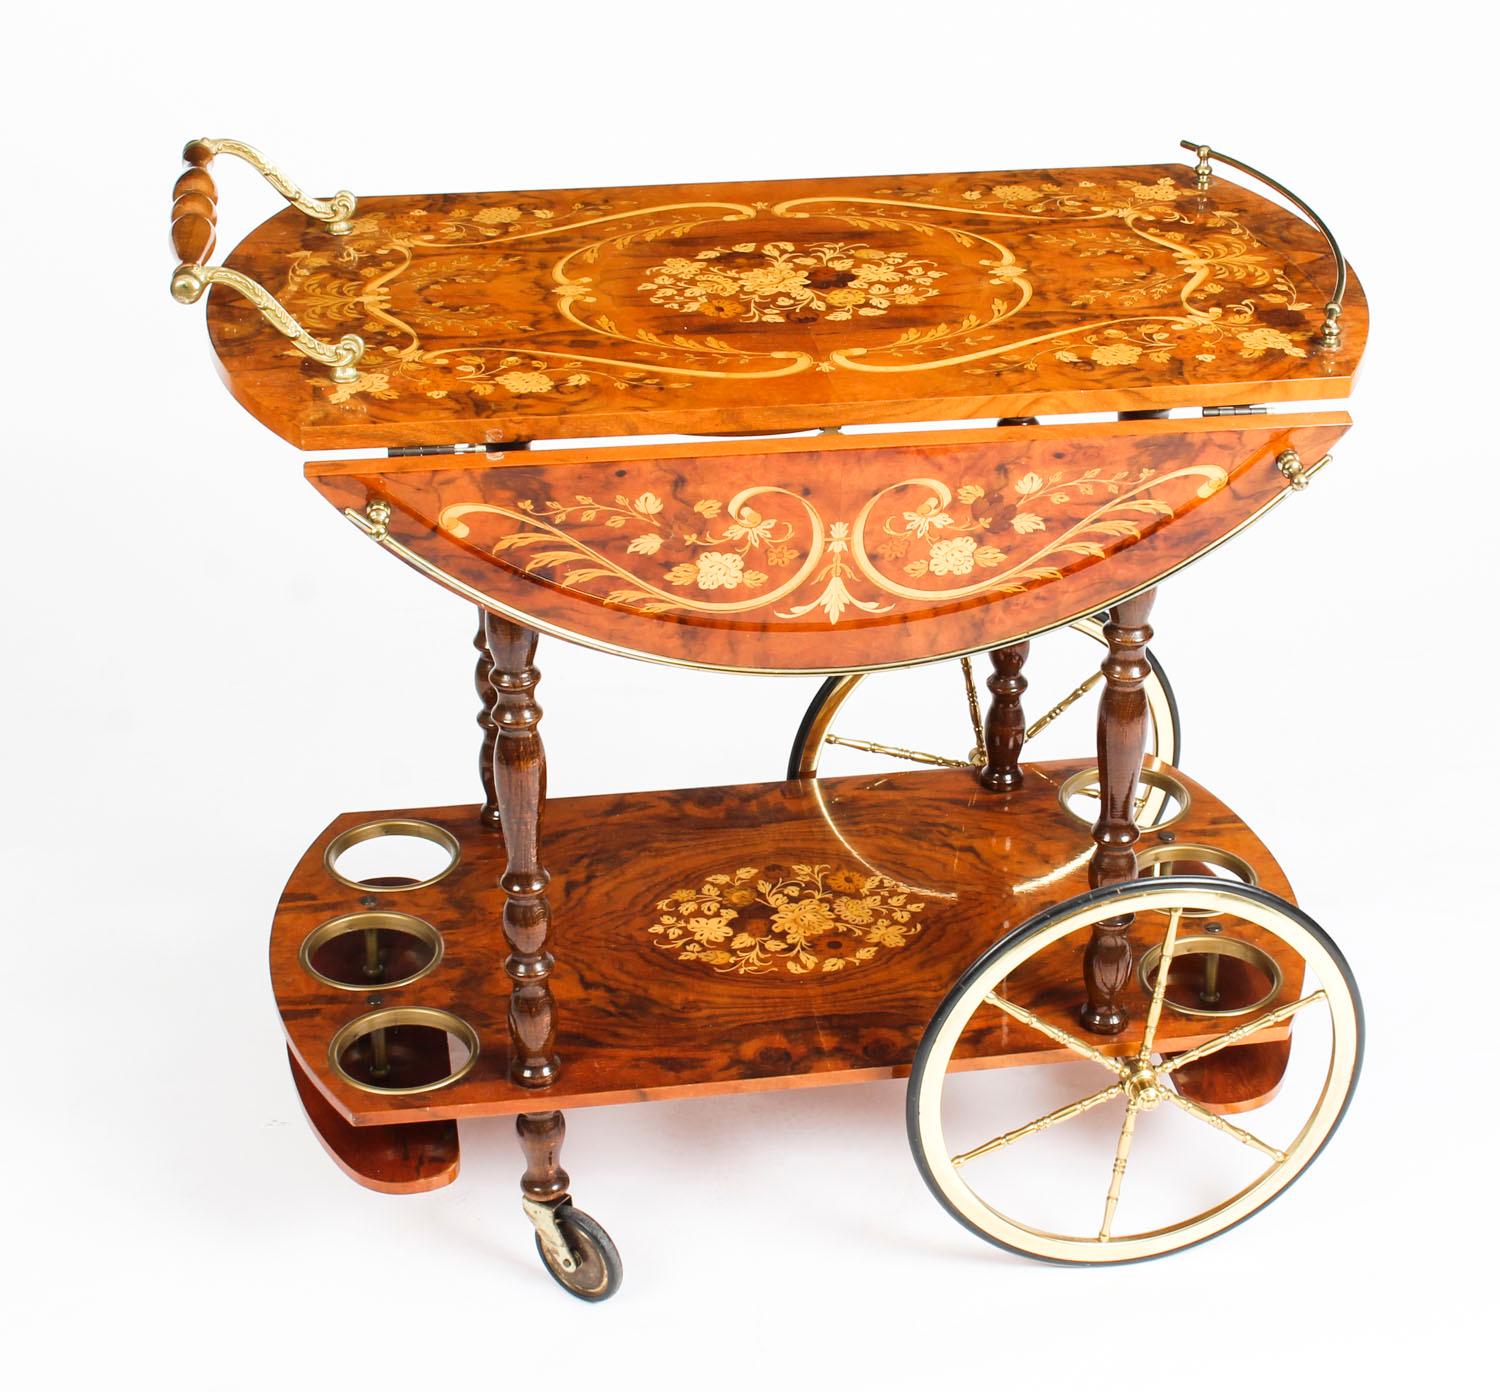 This is a very entertaining vintage midcentury Italian Sorrento drinks trolley.

The trolley is very decorative, with profuse floral marquetry decoration, galleried ormolu borders, and handles.

It can be used for serving drinks or purely for